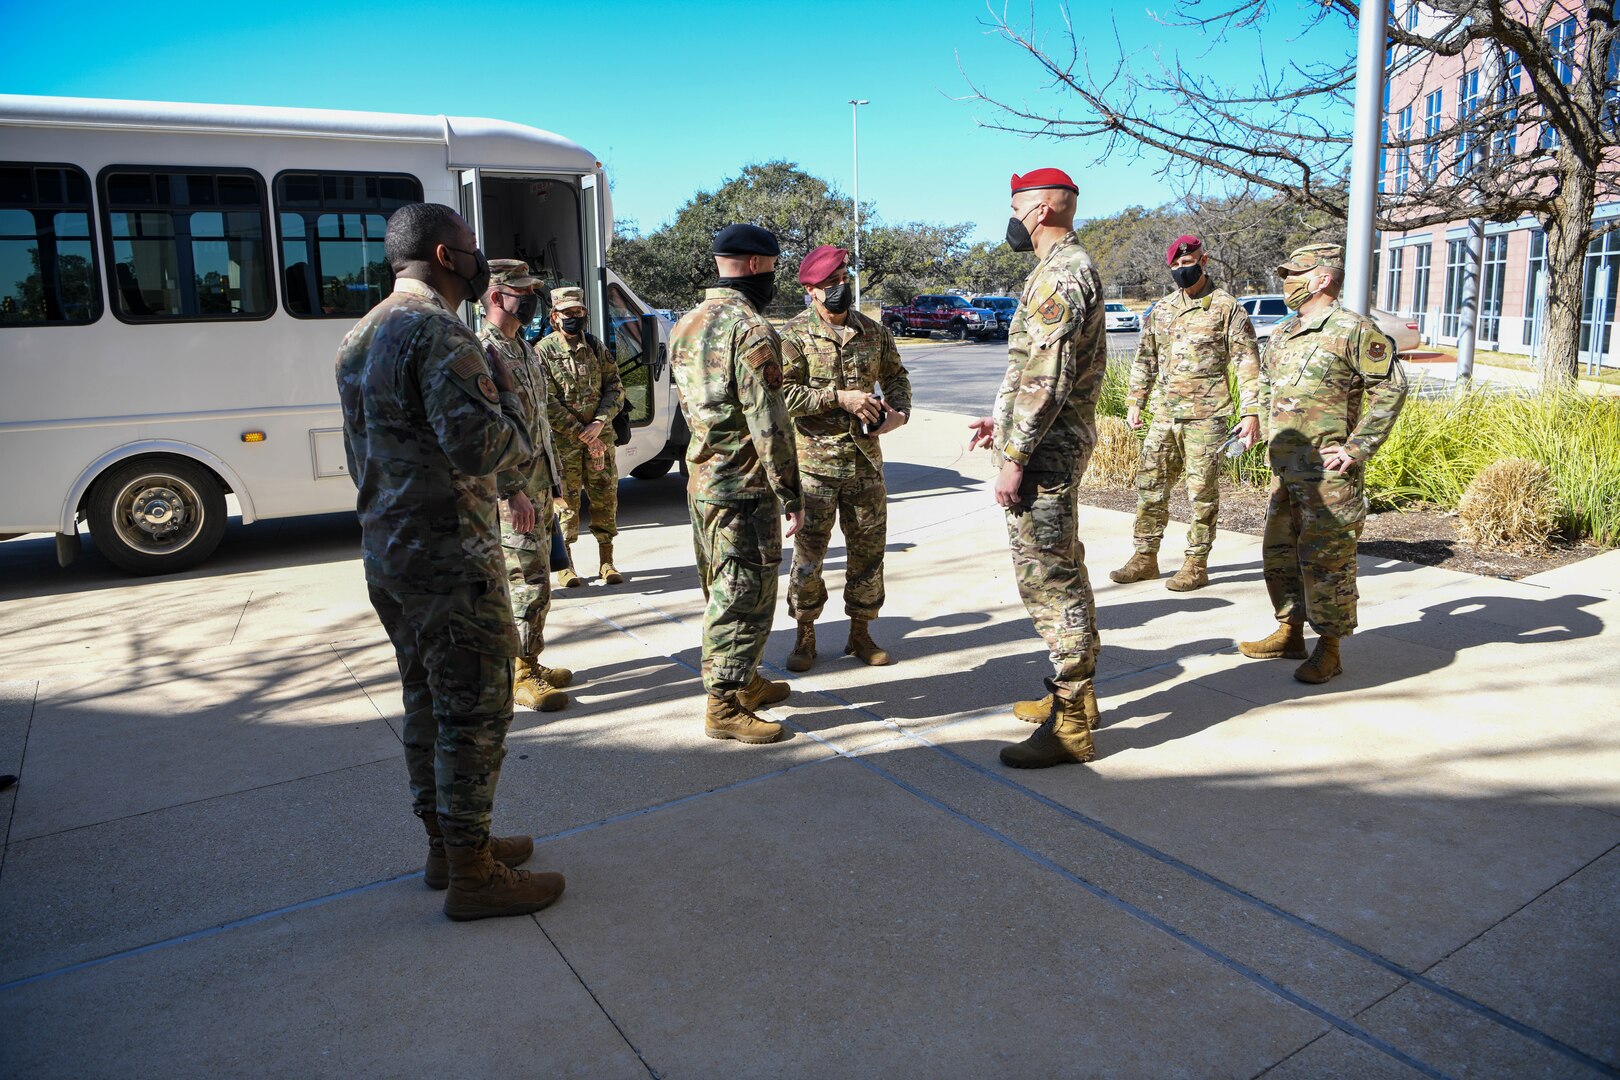 Senior Enlisted Advisor to the Chairman of the Joint Chiefs of Staff meets the commander of the 330th Recruiting Squadron in San Antonio Feb. 9, 2022.